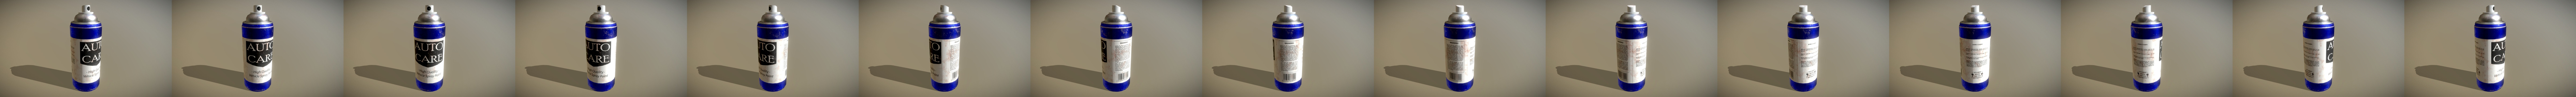 3D model Spray Paint Can VR / AR / low-poly